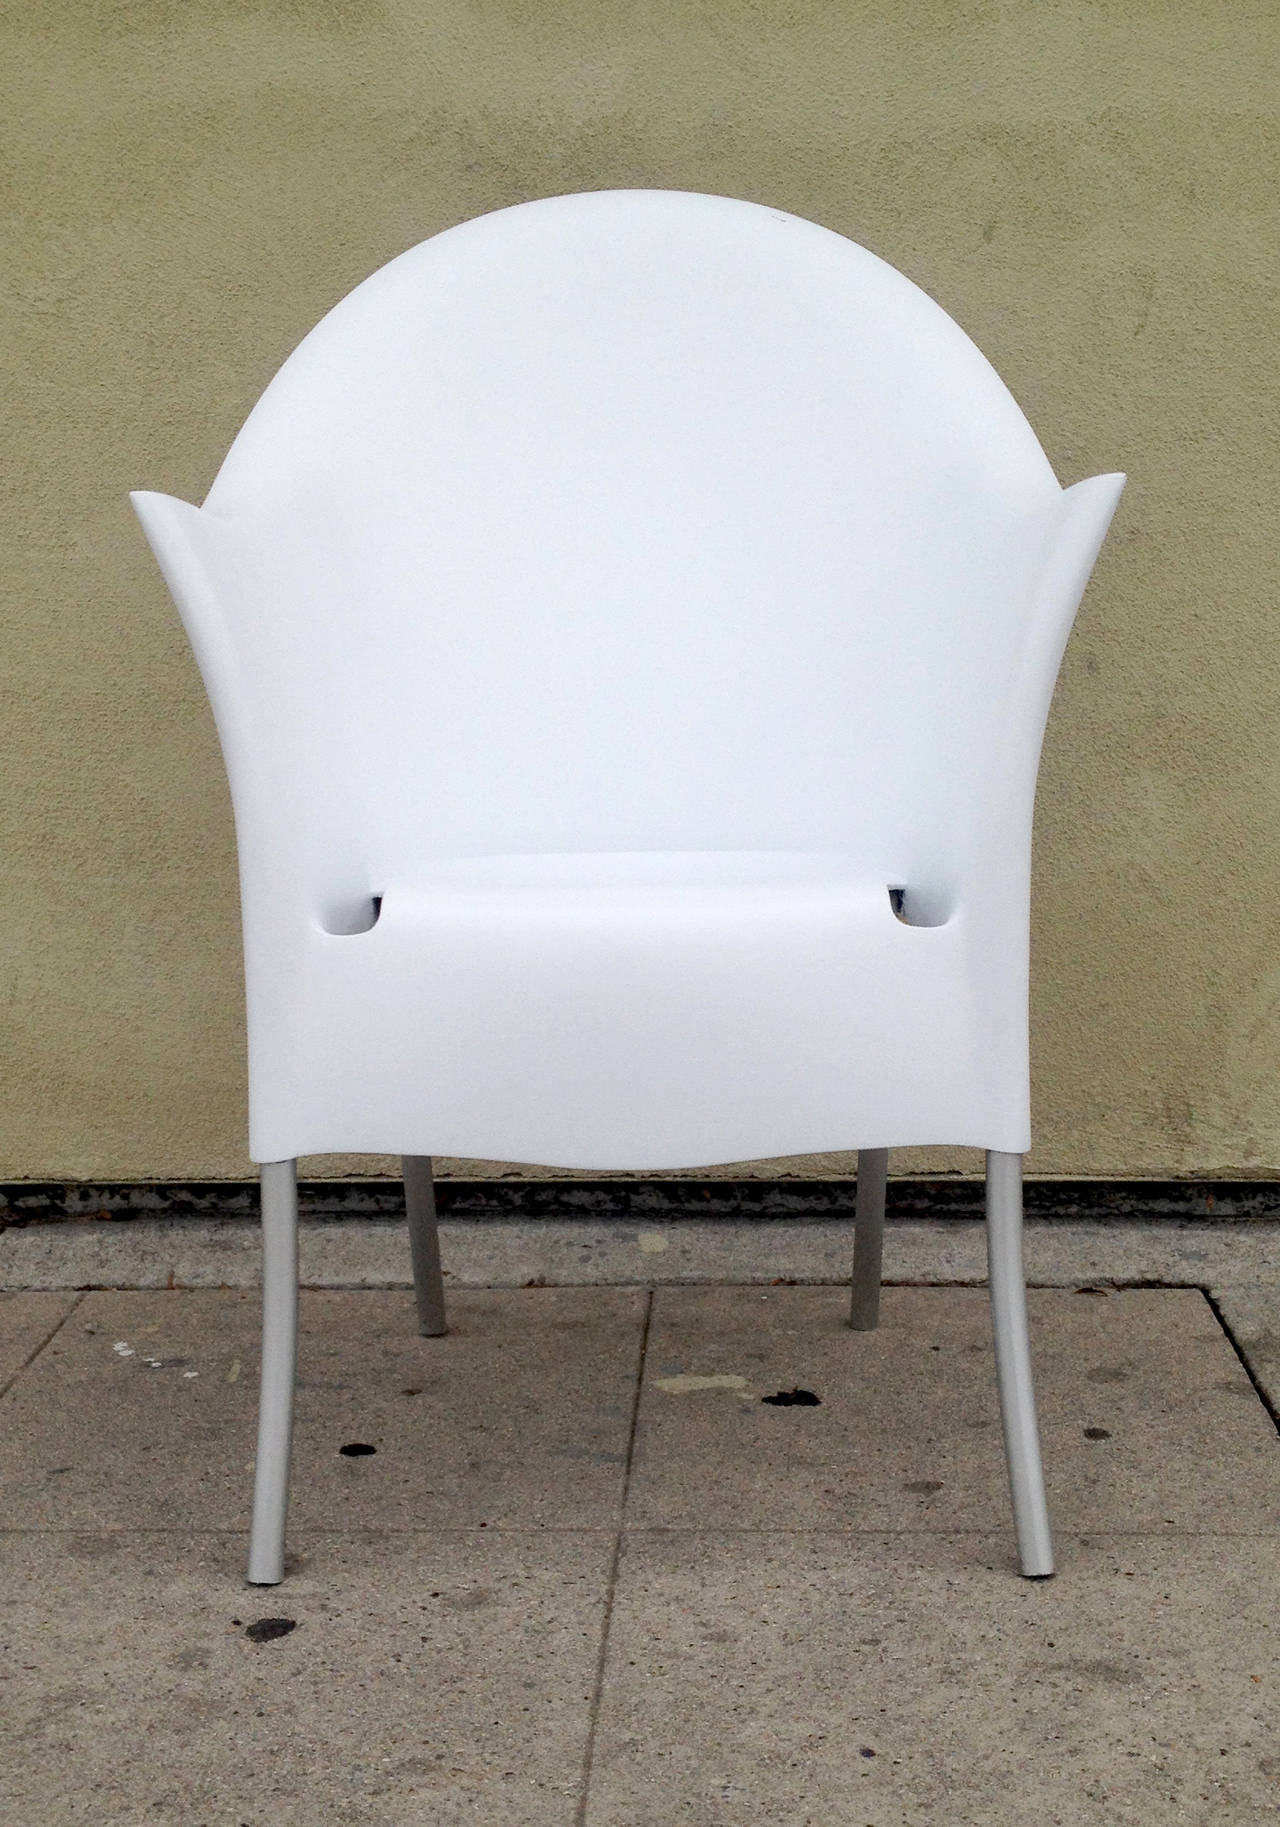 Aluminium structure and anodised aluminium legs and polypropylene shells, these chairs are very comfortable and light.
They are perfect for outdoor with the 2 holes to let the rain escape.